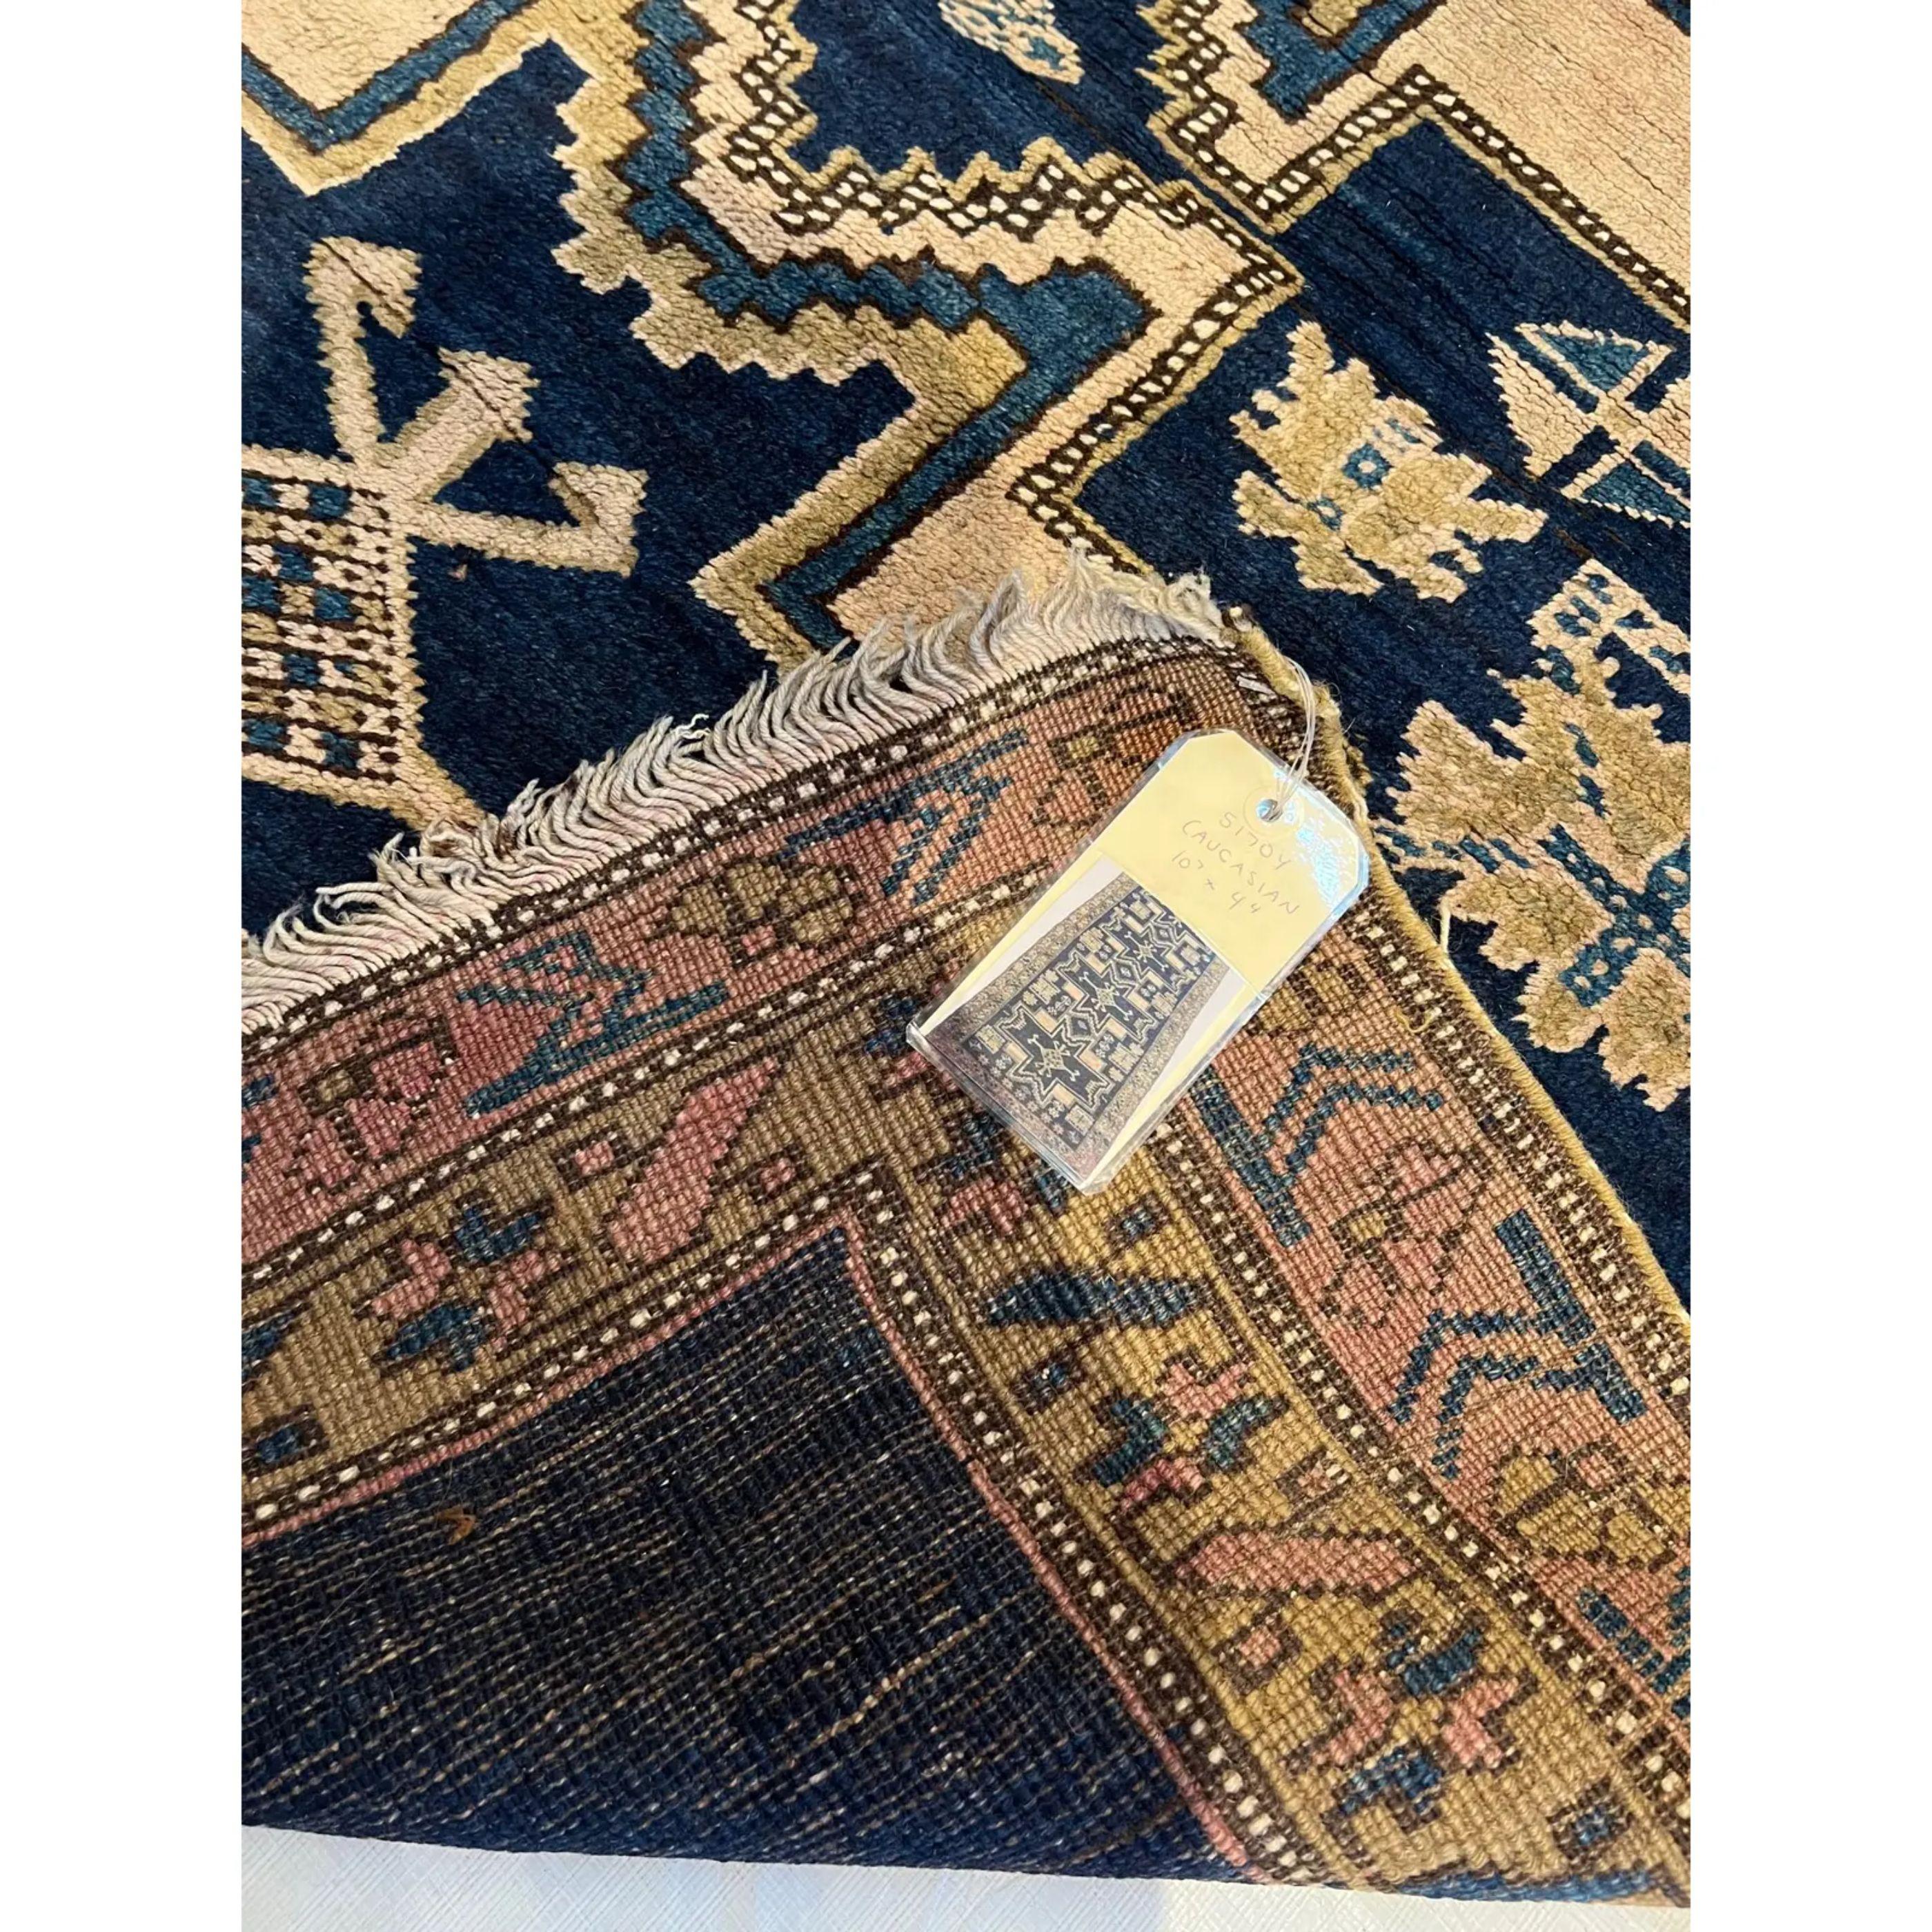 1900s Antique Caucasian Rug, tribal handmade and hand-knotted